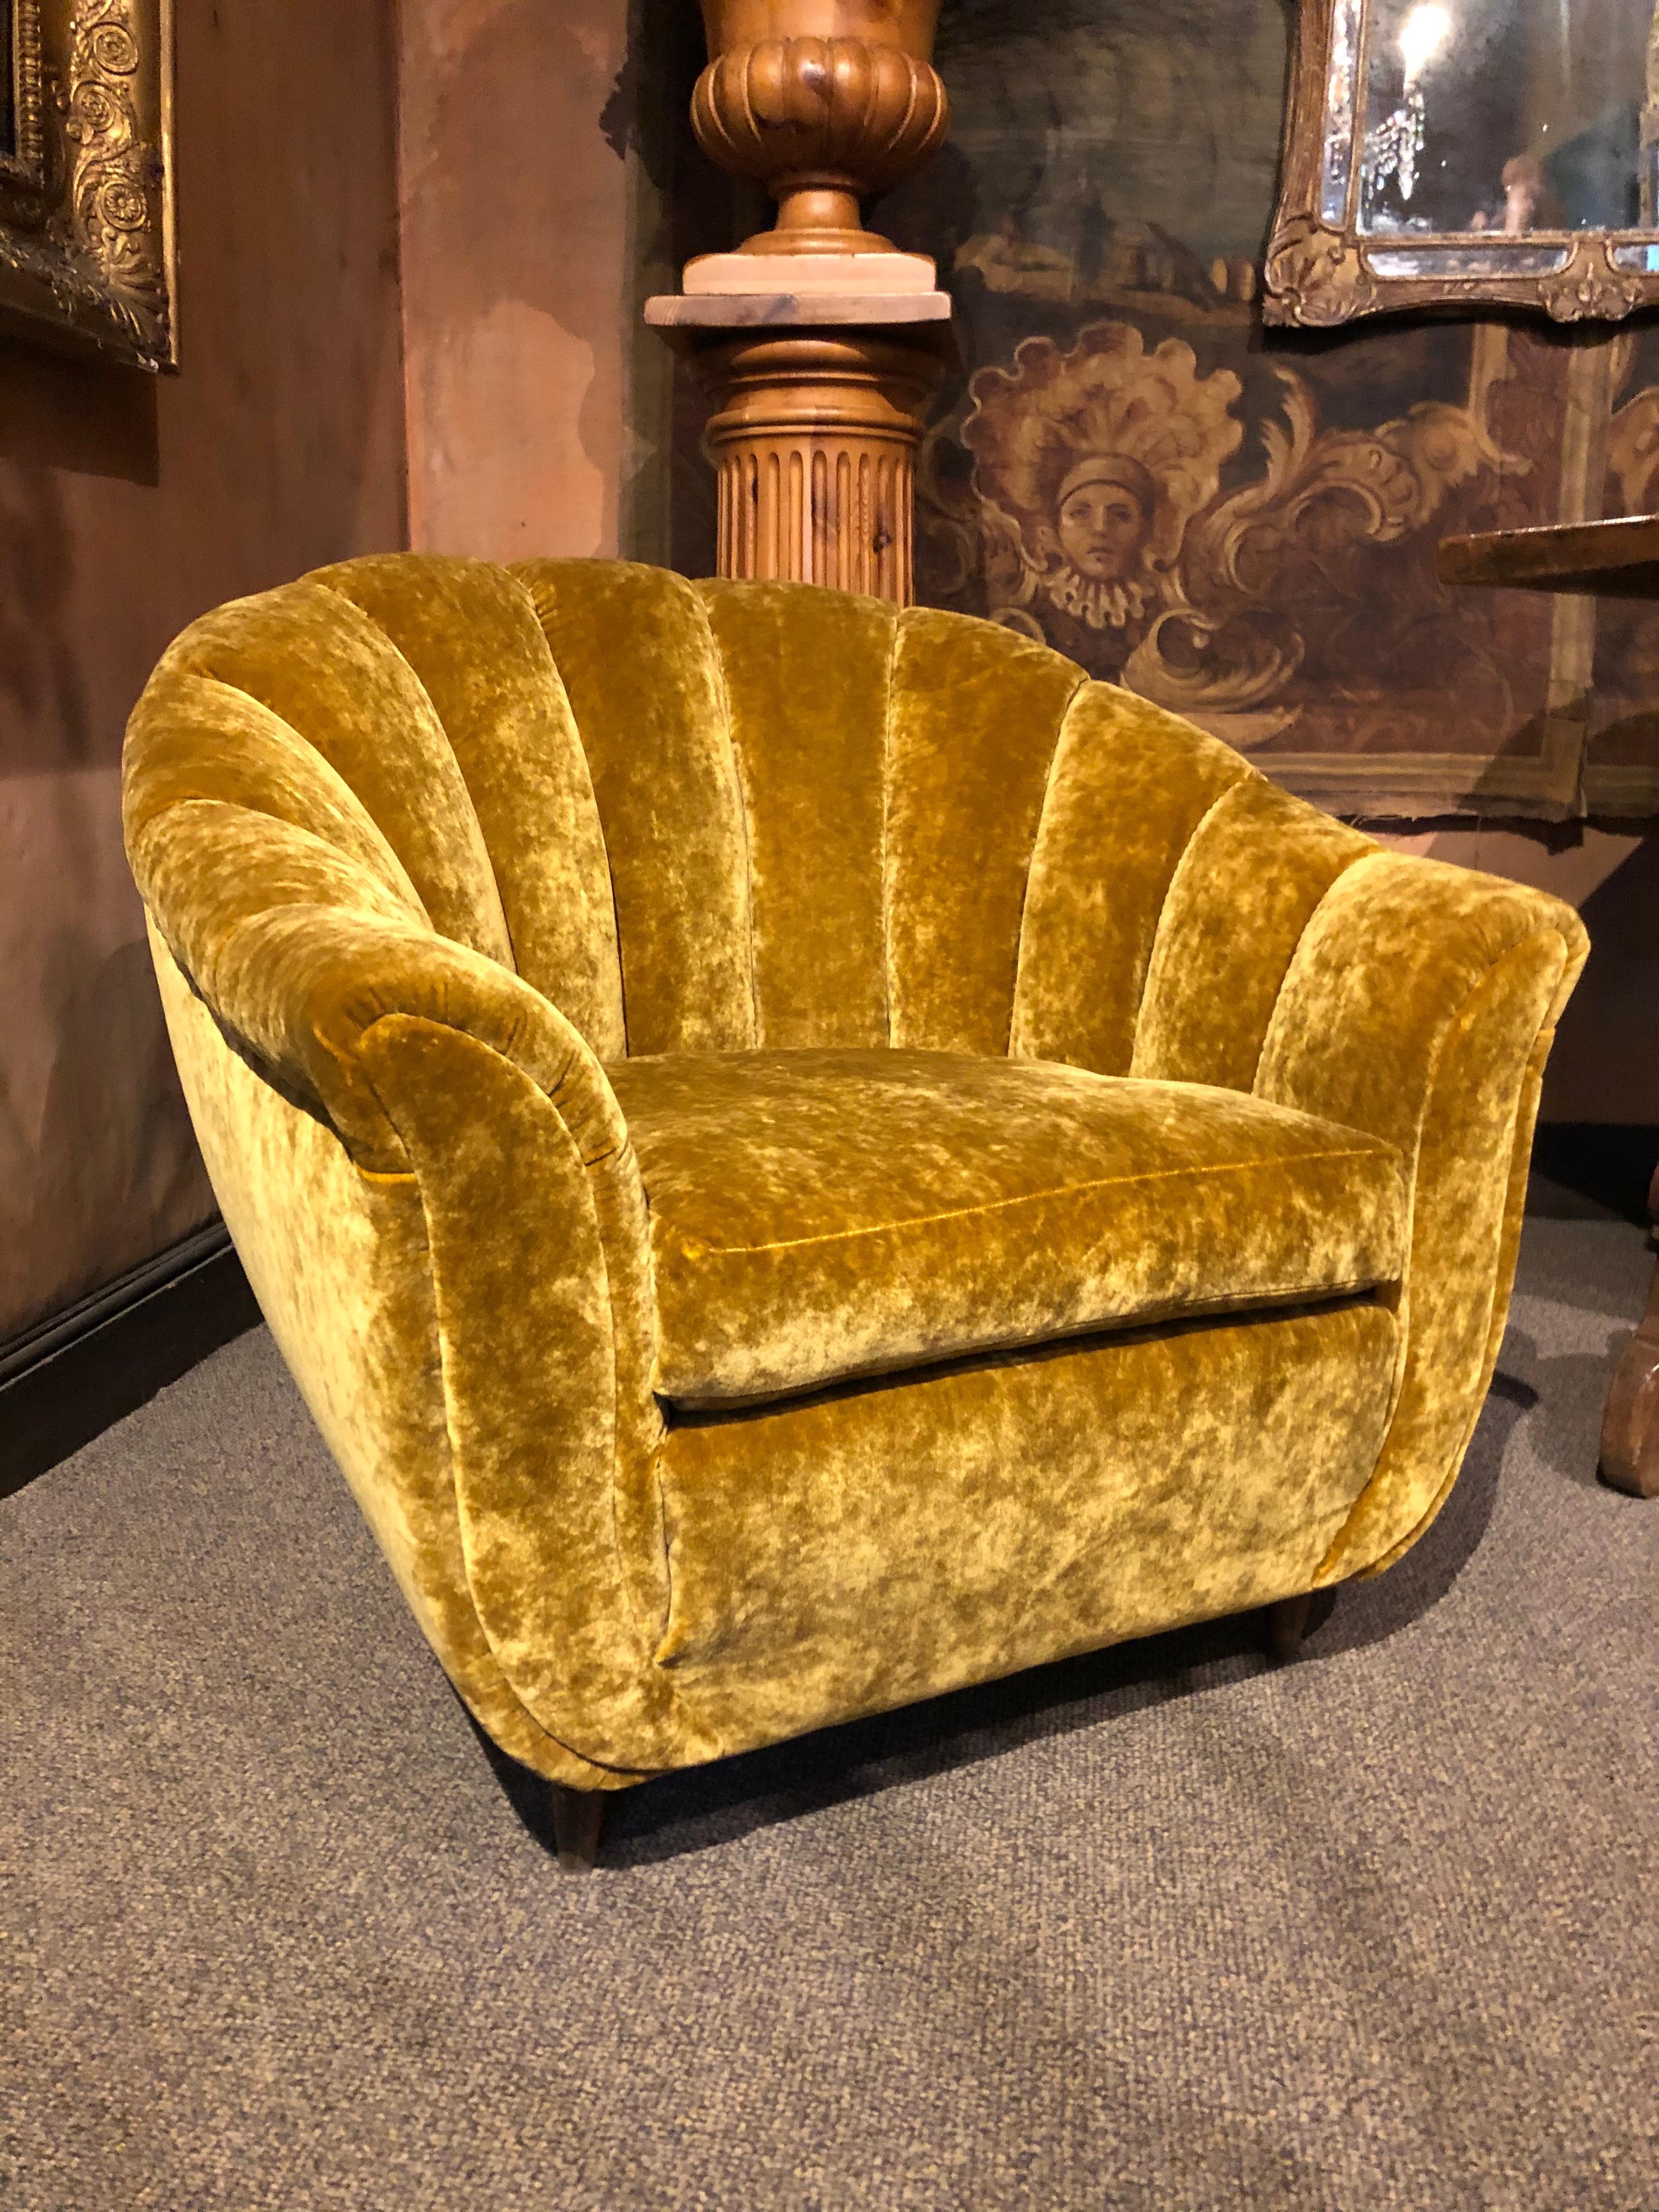 Re-upholstered with a golden mustard changing velvet fabric. Wooden leg. Seashell shape,
circa 1940
Italy

Sofa
Height : 31.4 in 
Seat height : 15.7 in
Length : 81.8 in
Depth : 25.5 in

Pair of armchairs, each 
Height : 32.2 in
Seat